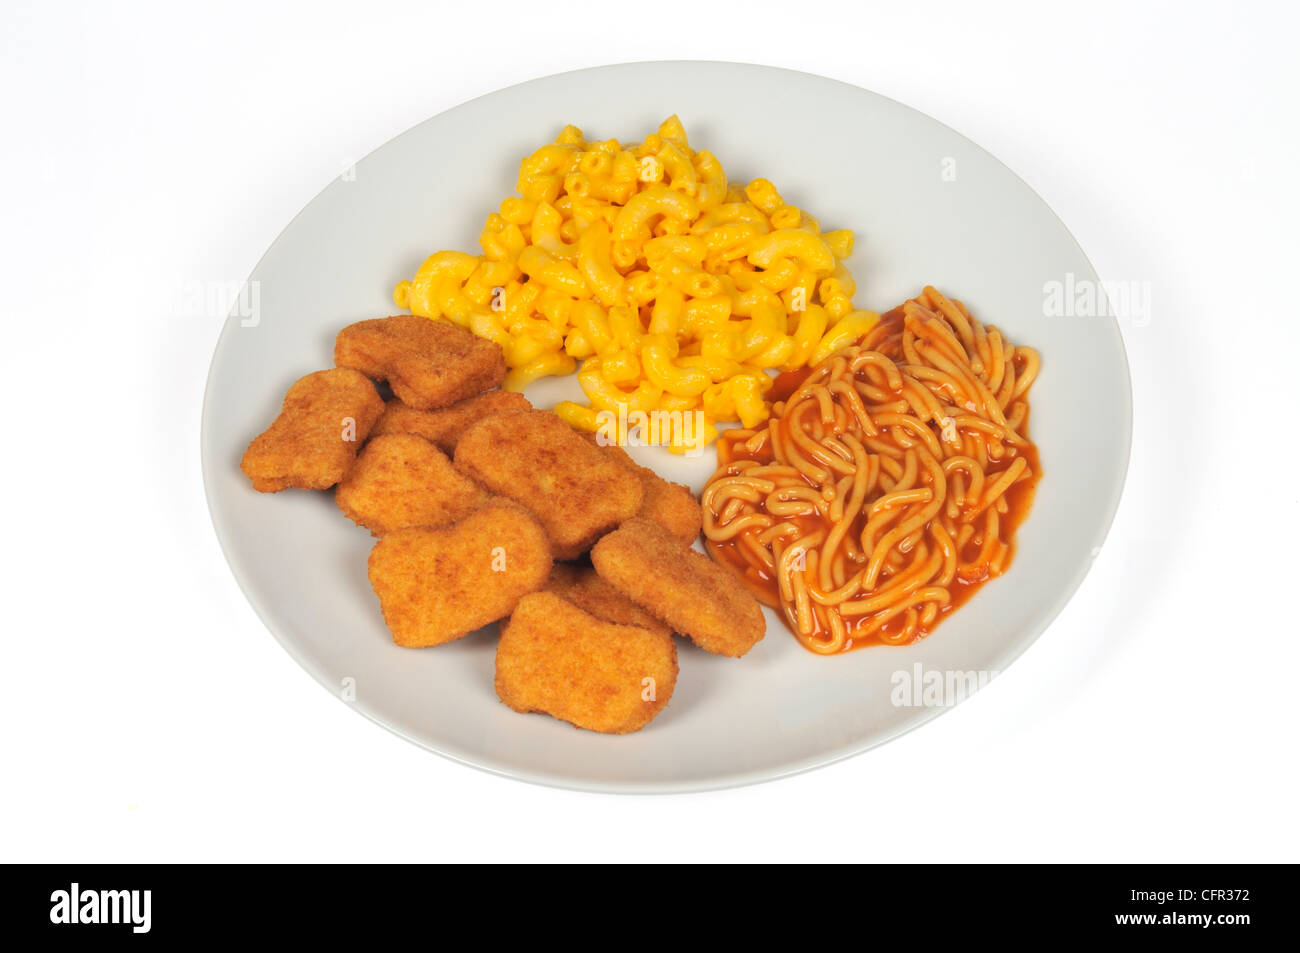 Breaded chicken nuggets, spaghetti with tomato sauce and macaroni and cheese on white plate on white background cut out. Stock Photo